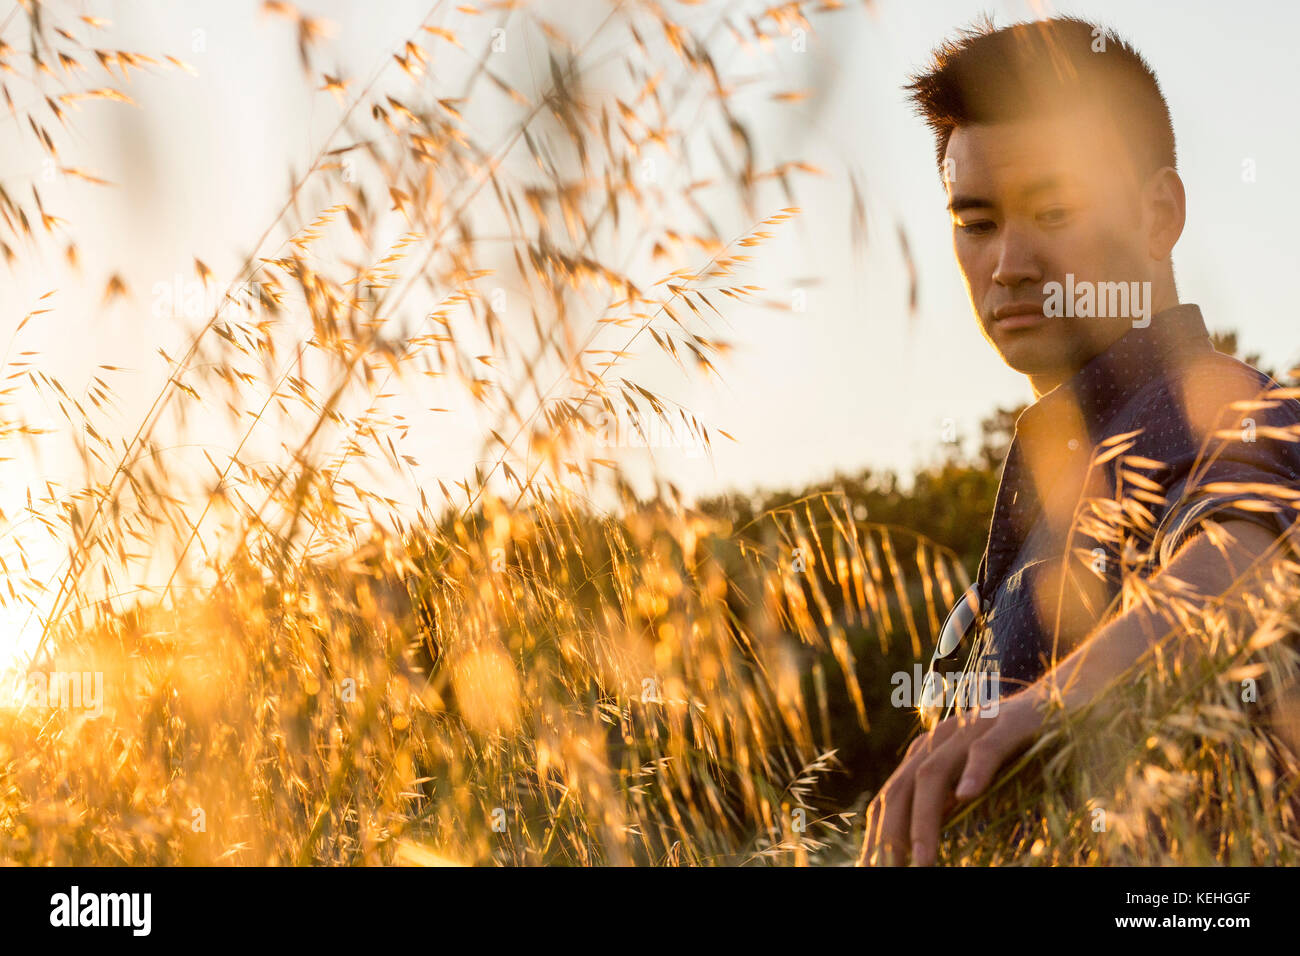 Serious Chinese man sitting in field of wheat Stock Photo